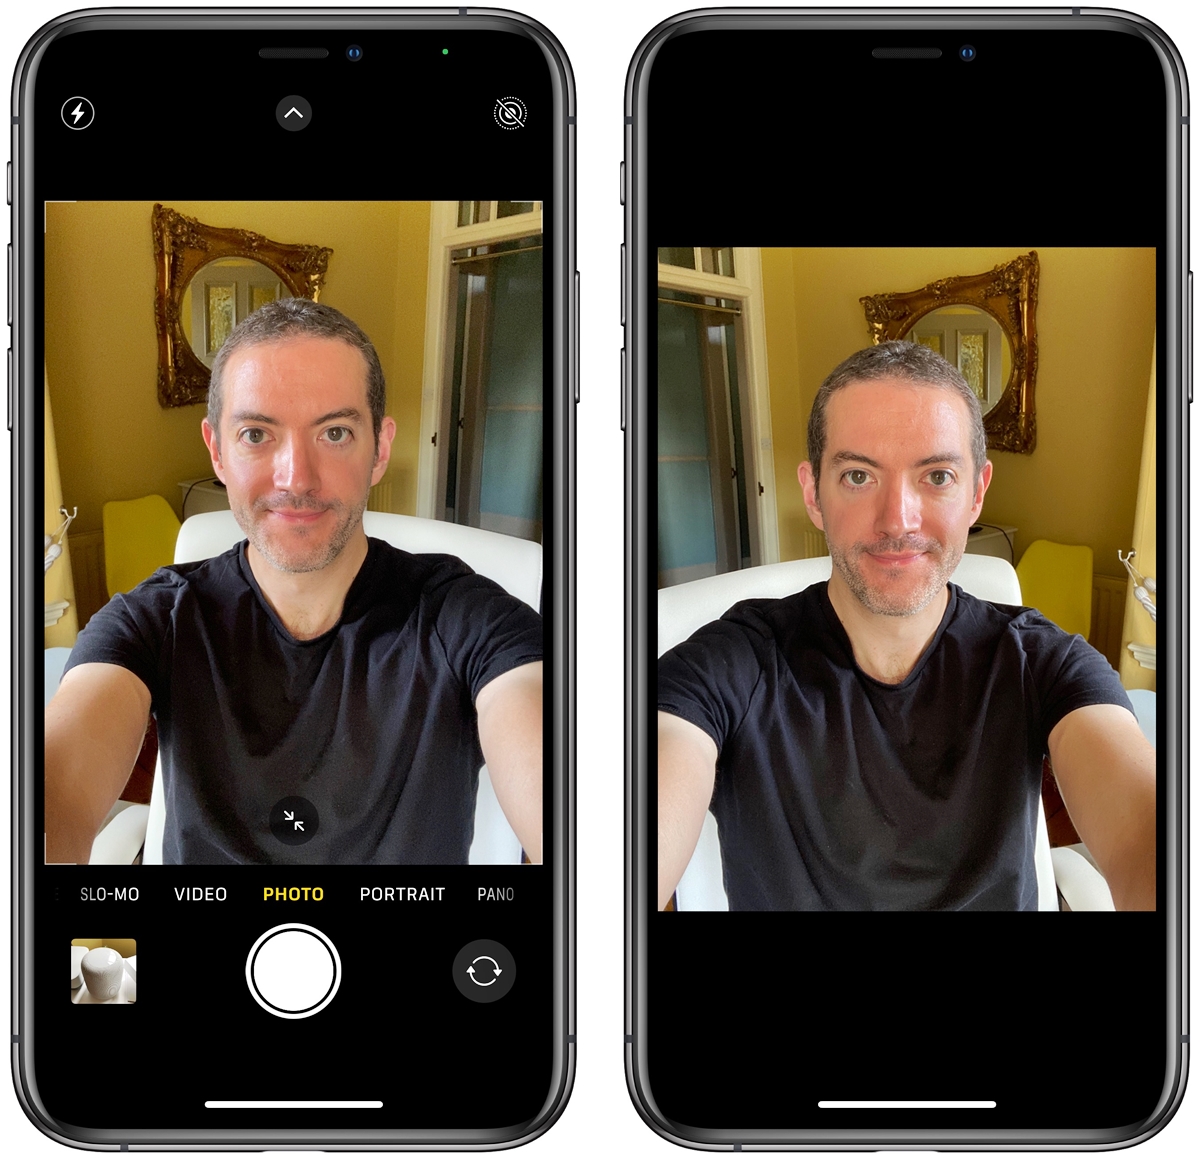 mirror-image-photos-how-to-flip-a-picture-on-iphone